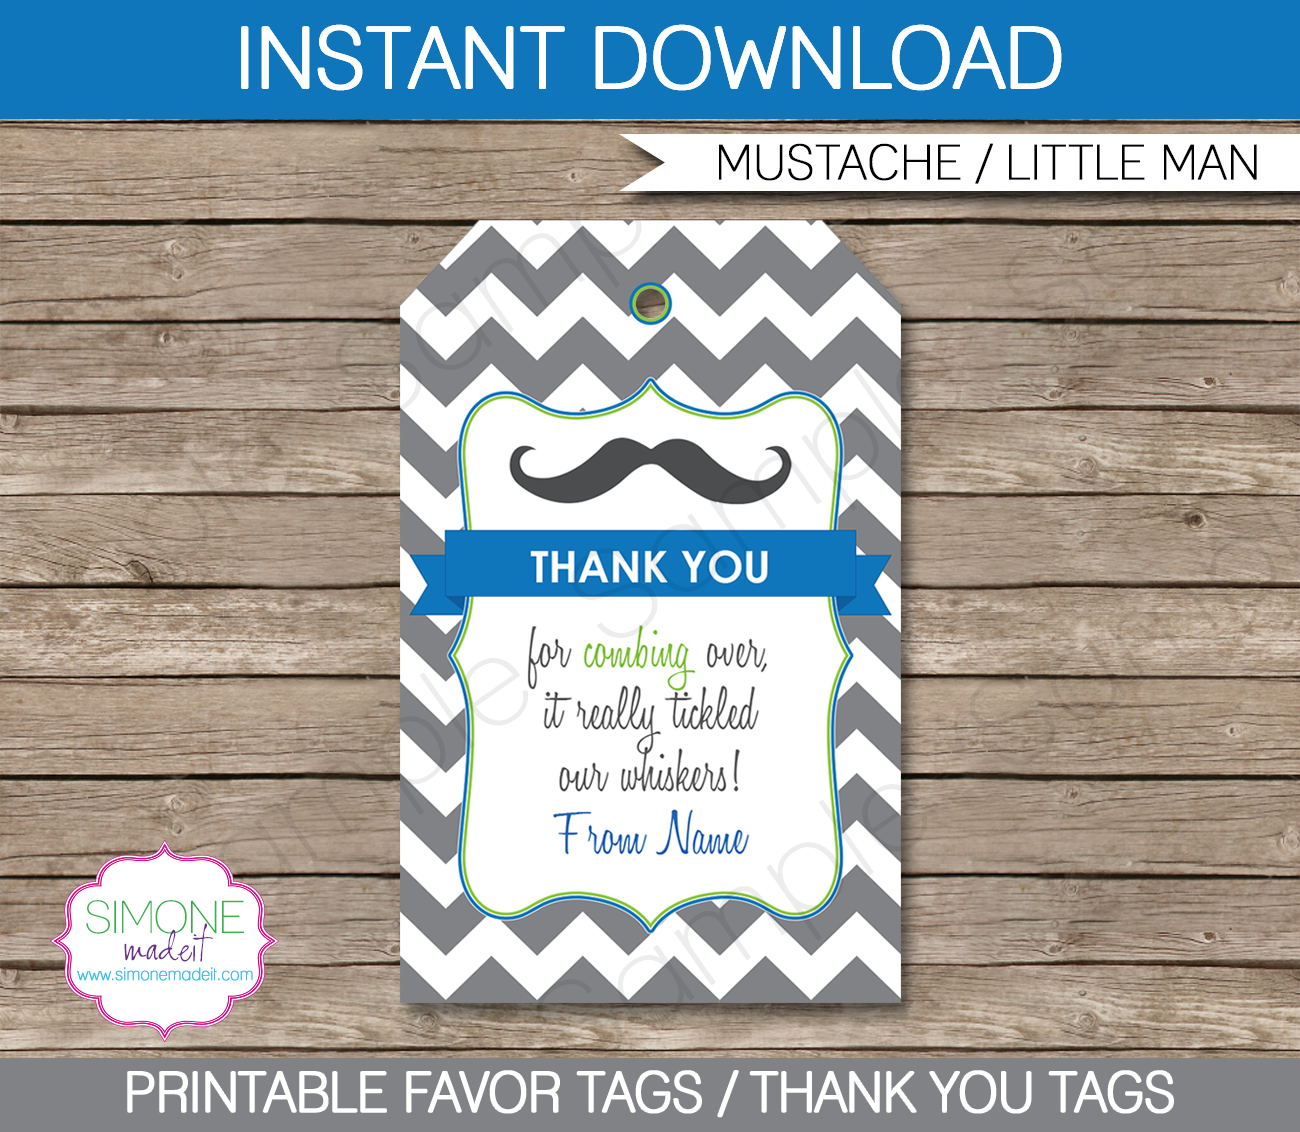 Mustache Party Favor Tags | Little Man | Thank You Tags | Birthday Party | Editable DIY Template | $3.00 INSTANT DOWNLOAD via SIMONEmadeit.com